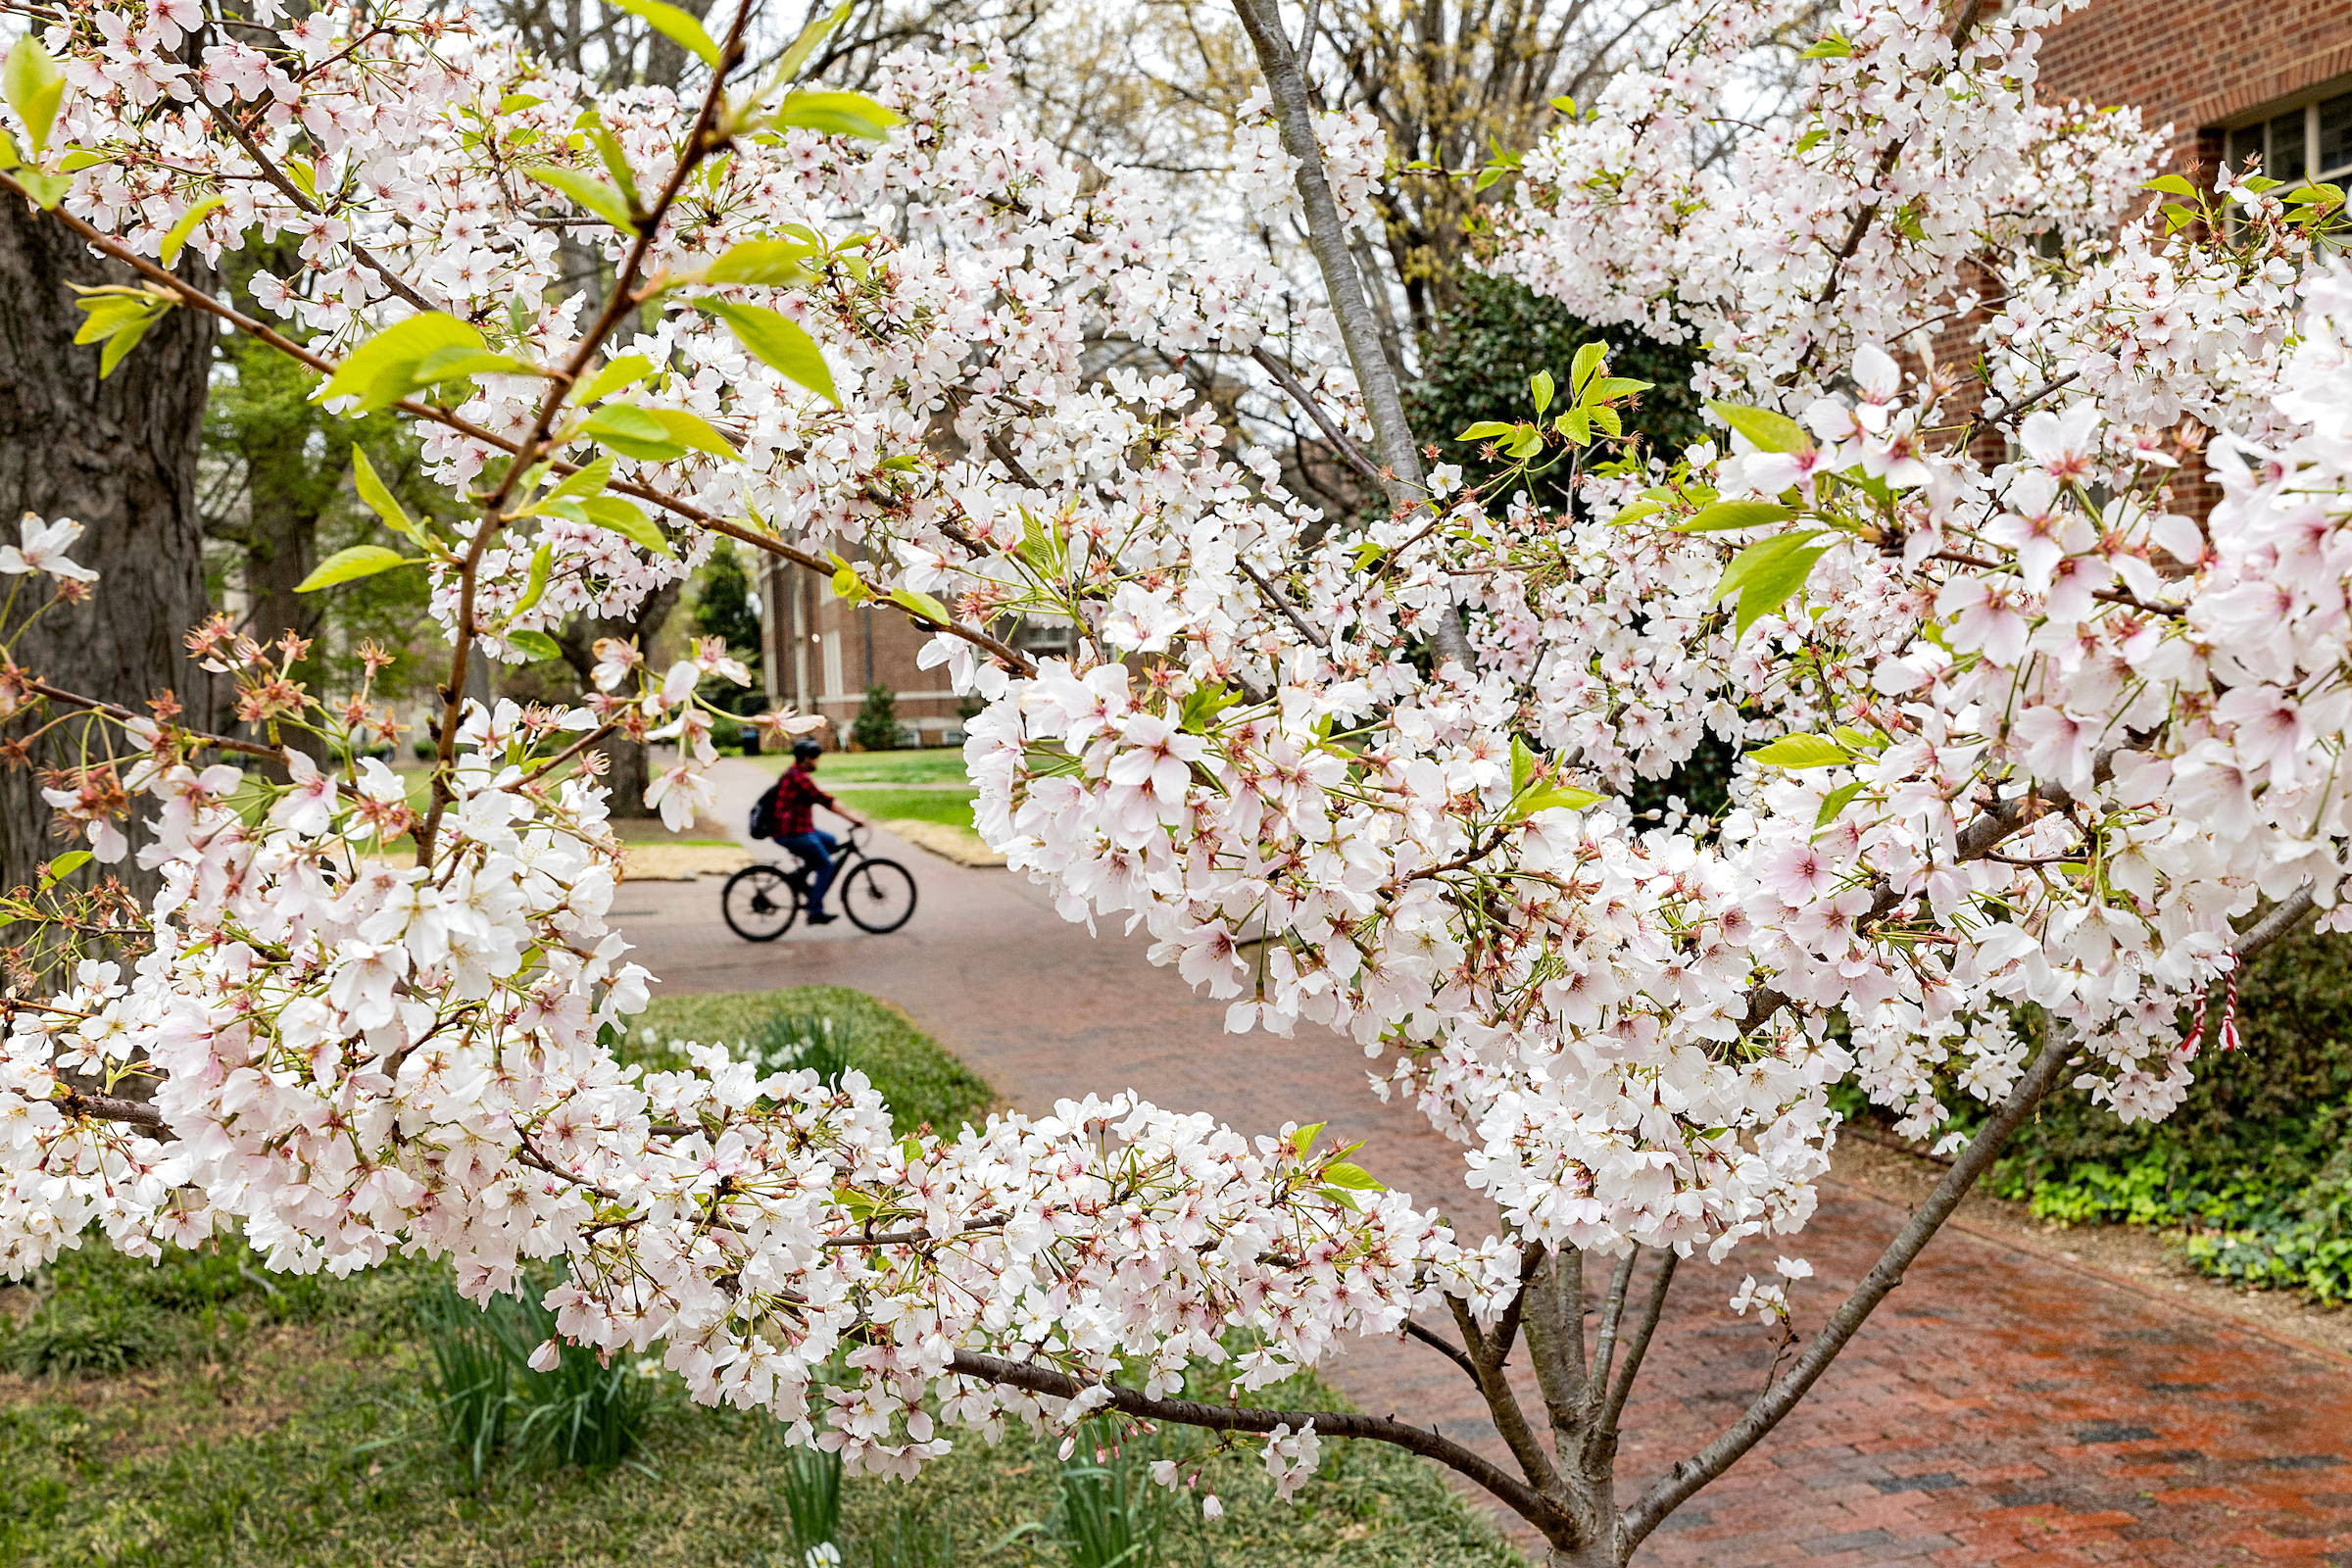 Small white flowers bloom on a tree, with campus walkways seen behind them.